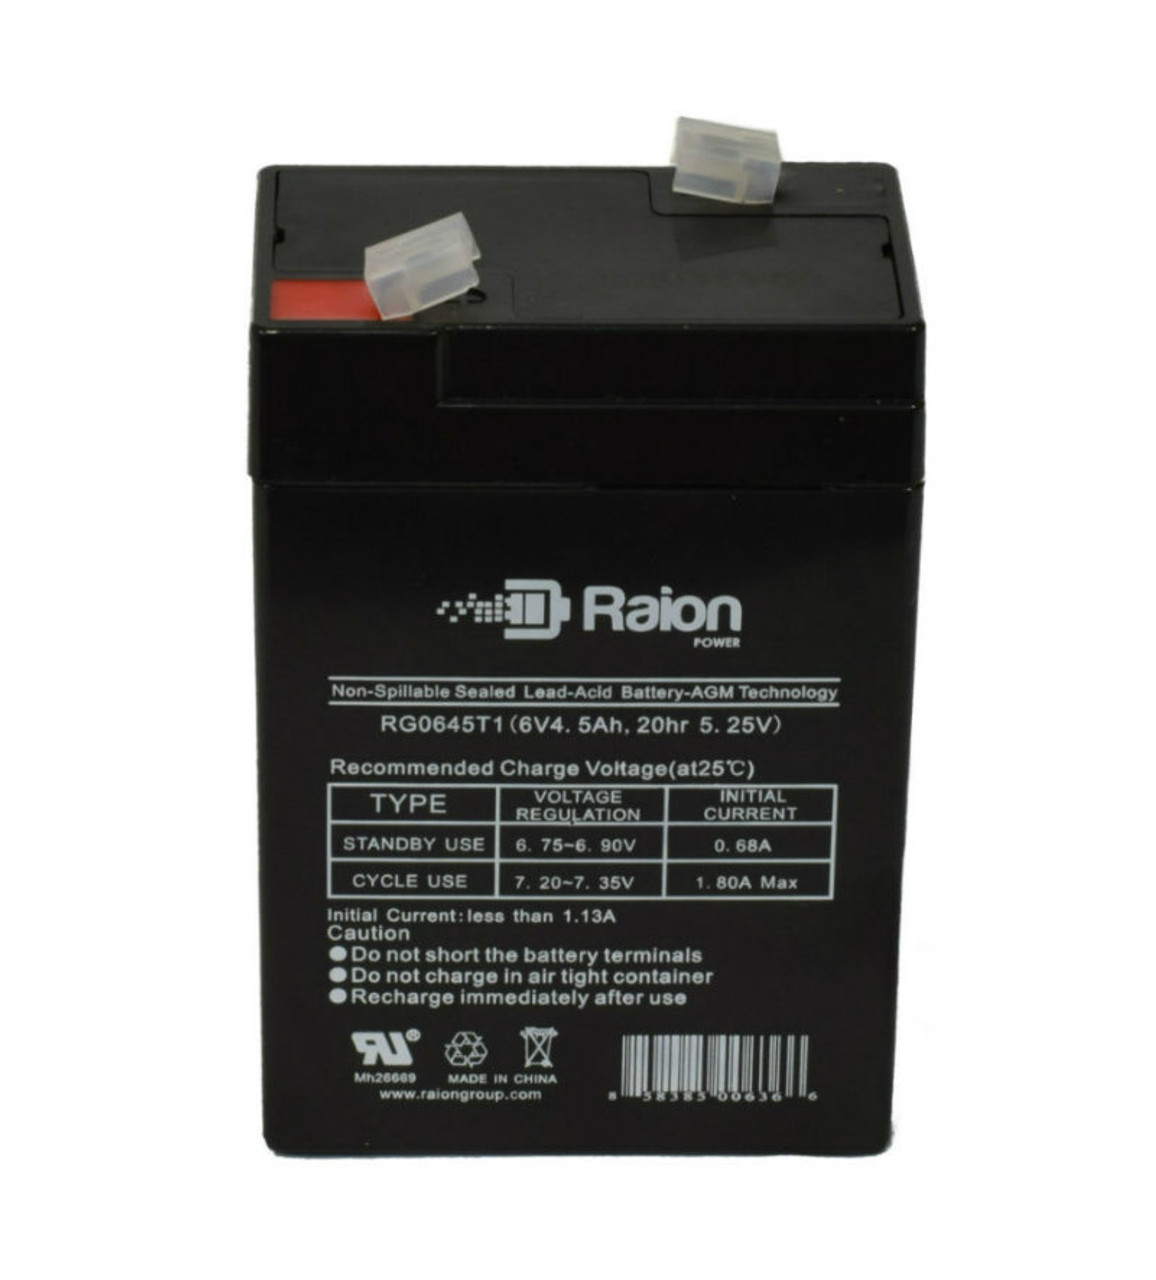 Raion Power RG0645T1 Replacement Battery Cartridge for Dual-Lite CVT3RB